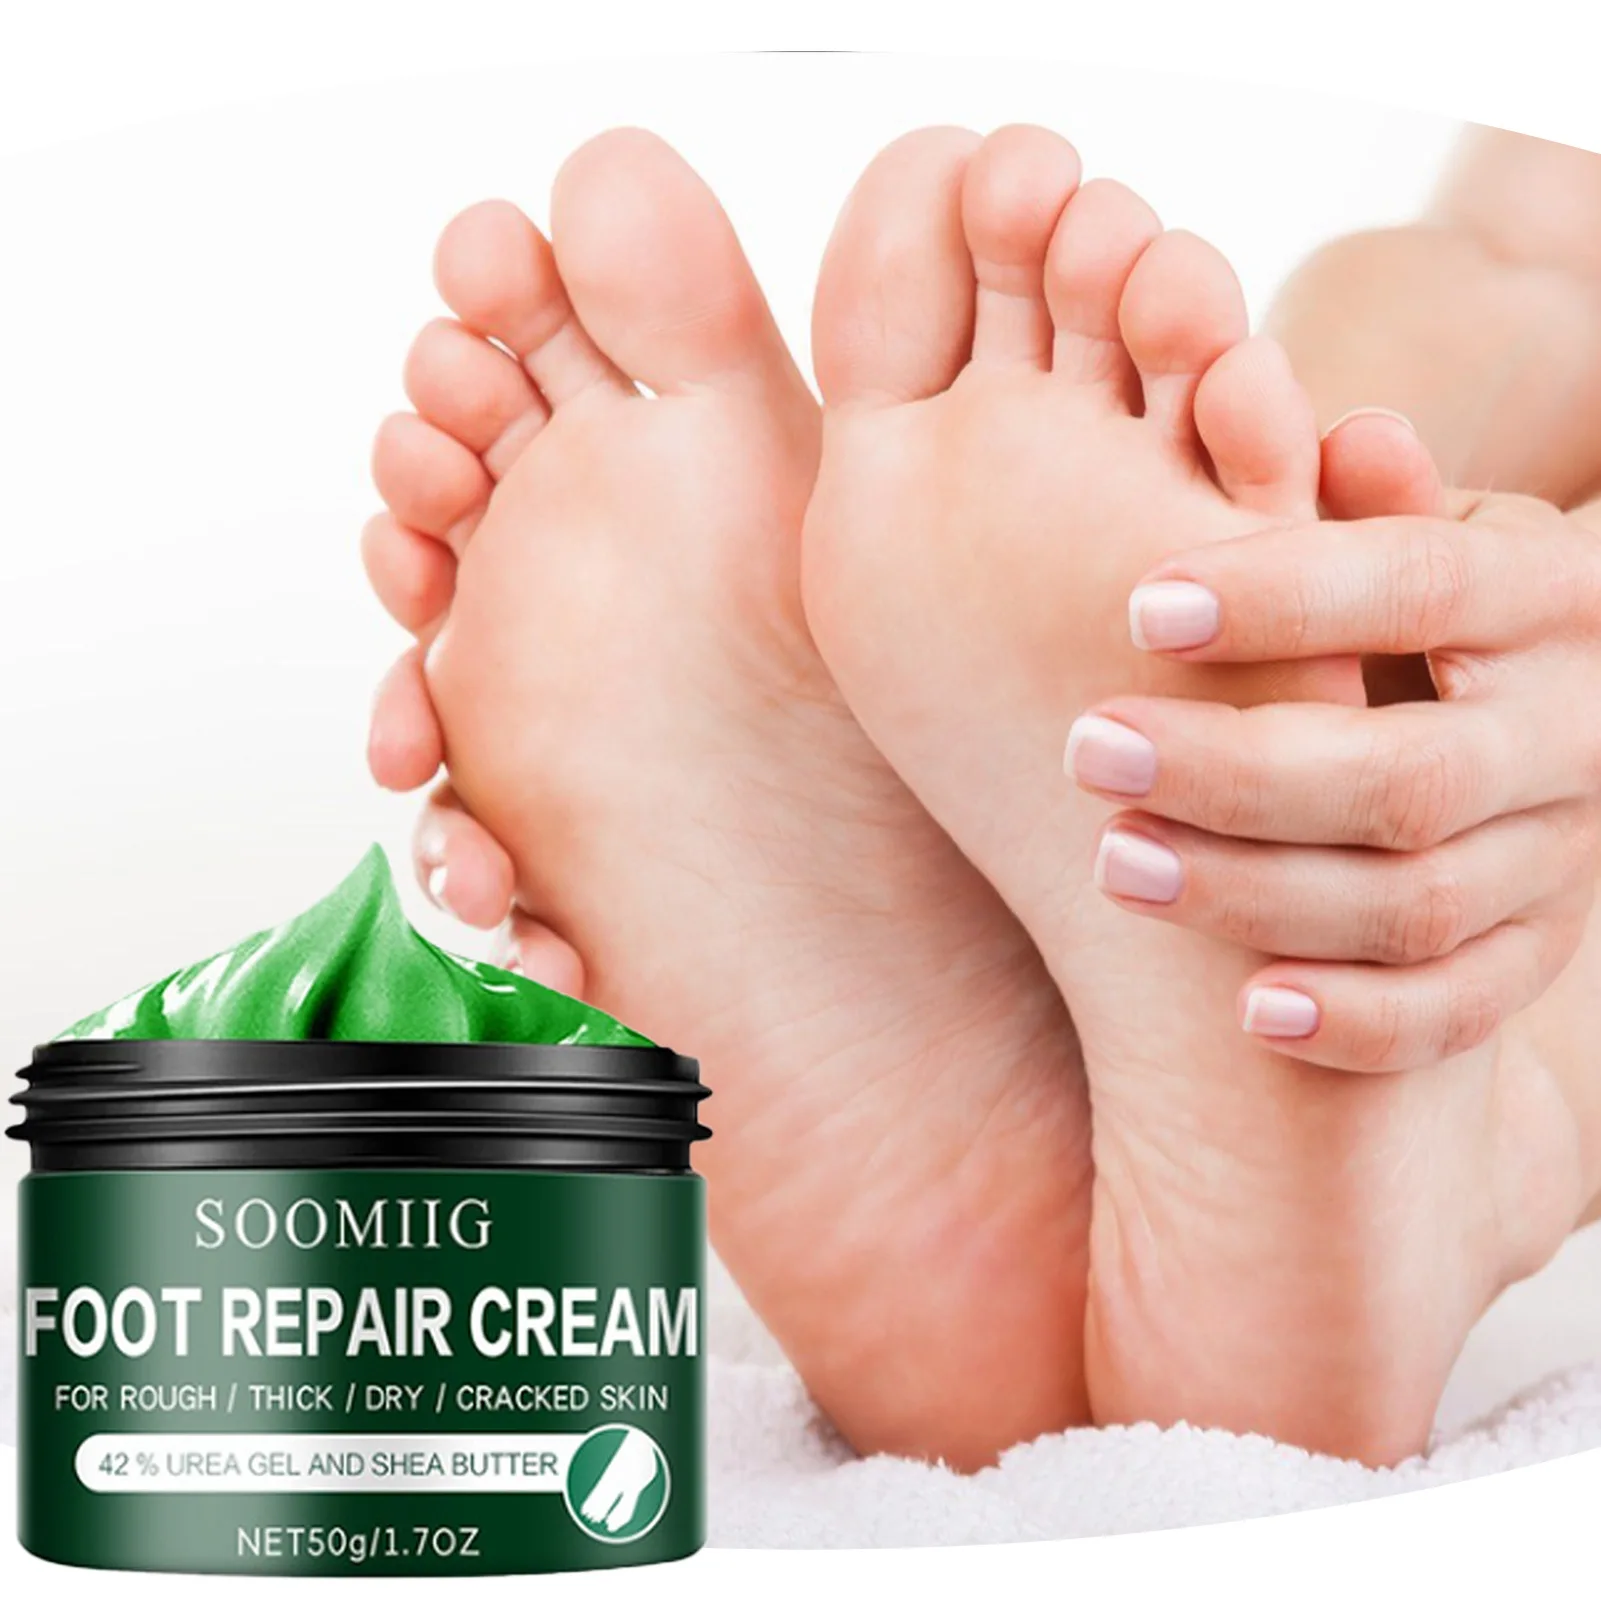 

2021 Hot Sale Foot Repair Cream for Cracked Heels Rough Dry Thick Skin Care Dead Exfoliating Feet Spa Pedicure Crack Foot Cream, Green